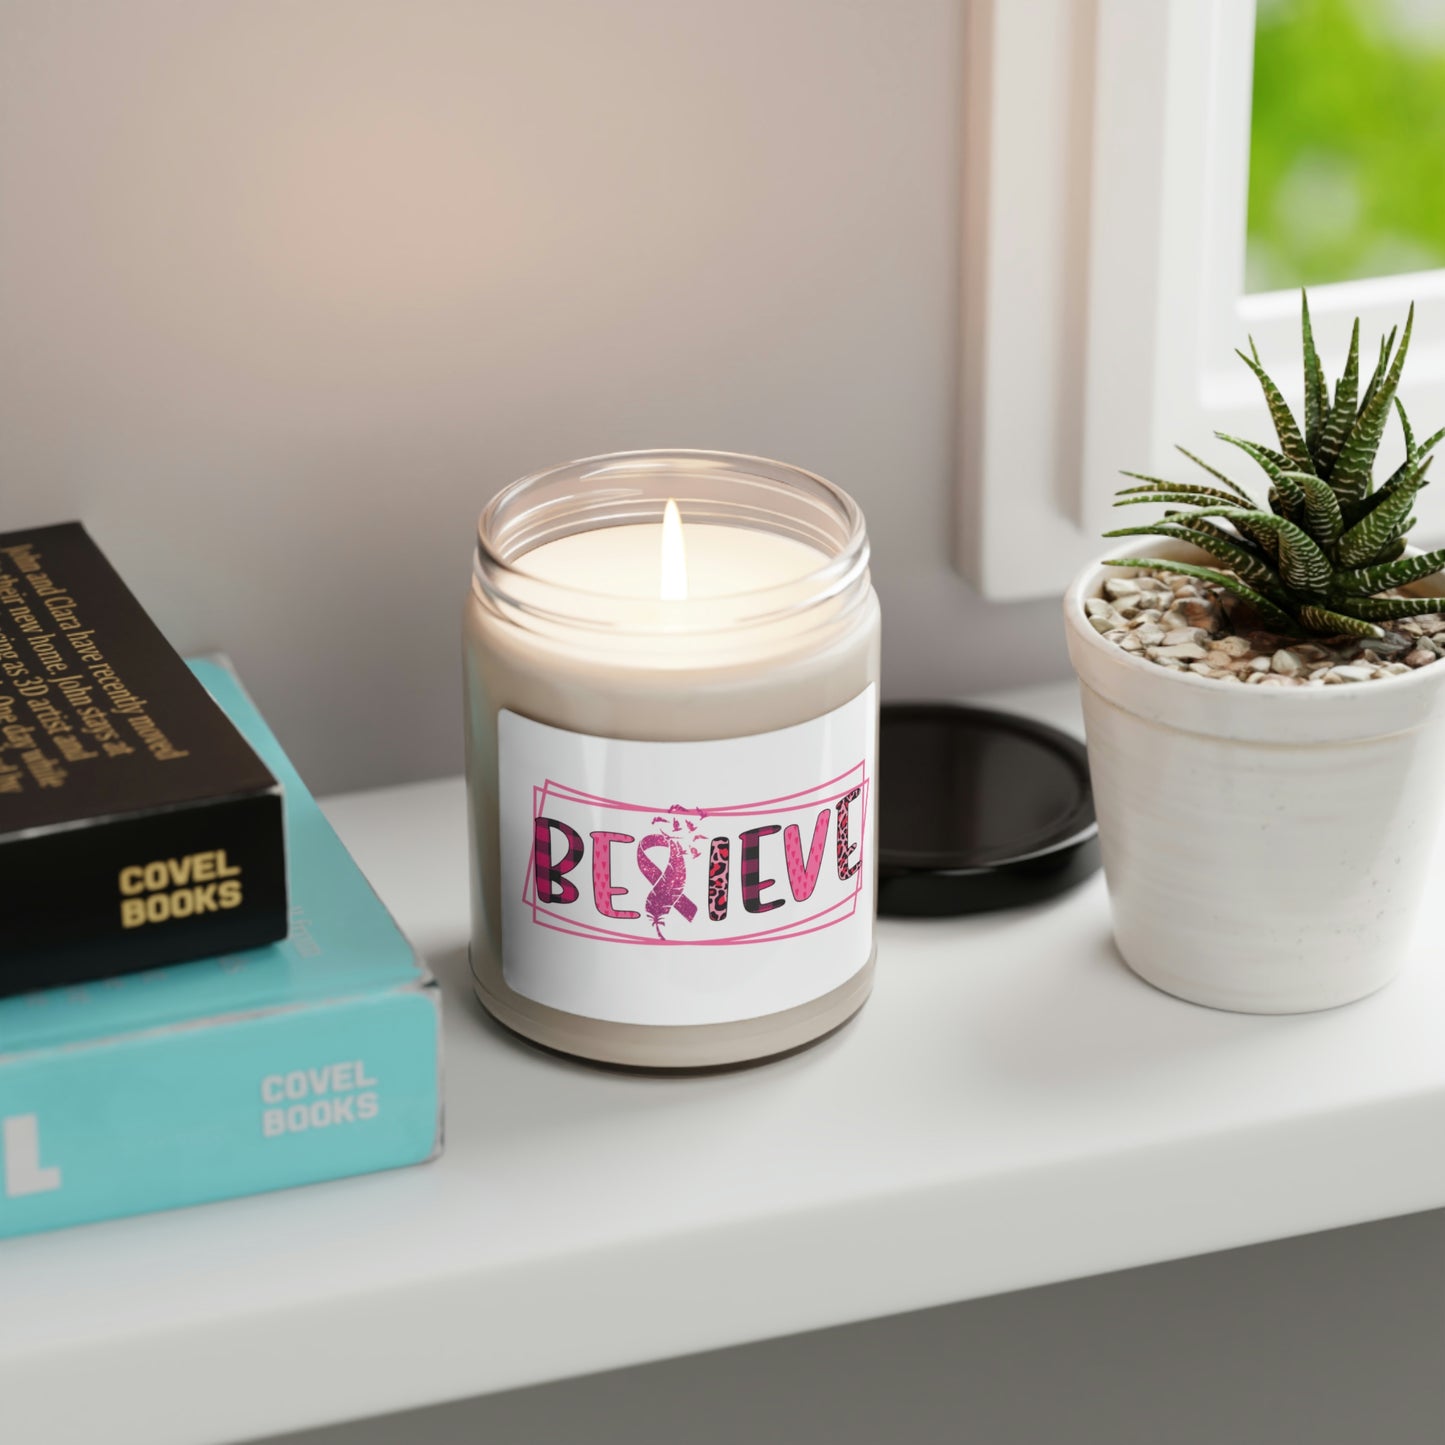 Believe Scented Soy Candle 9oz